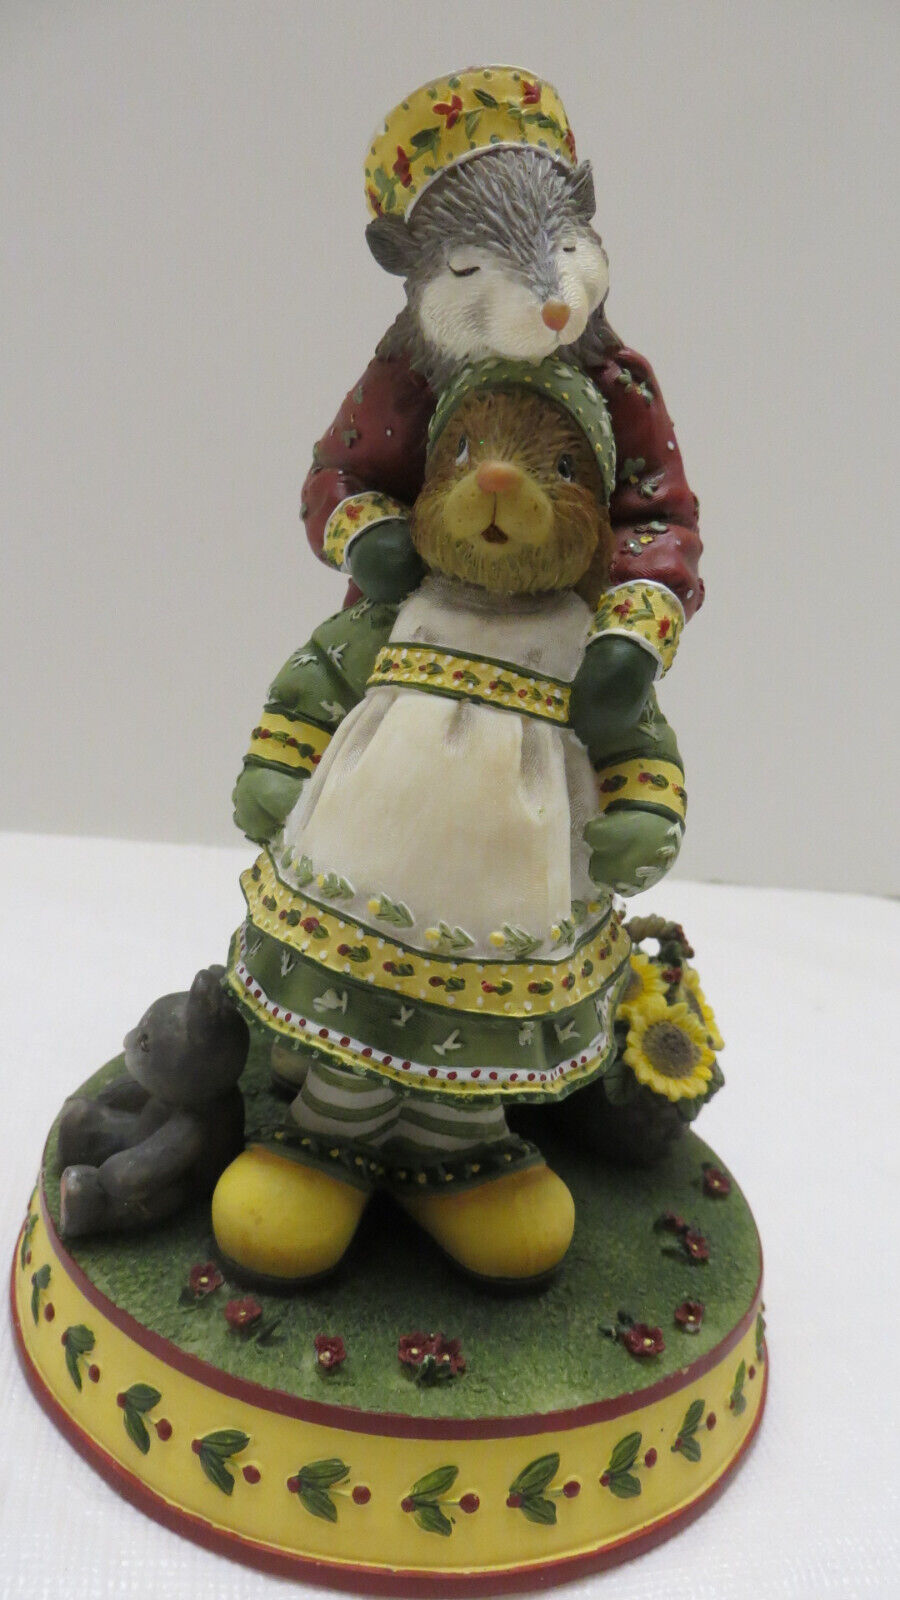 Woodsong Mother’s Love 2002 Figurine